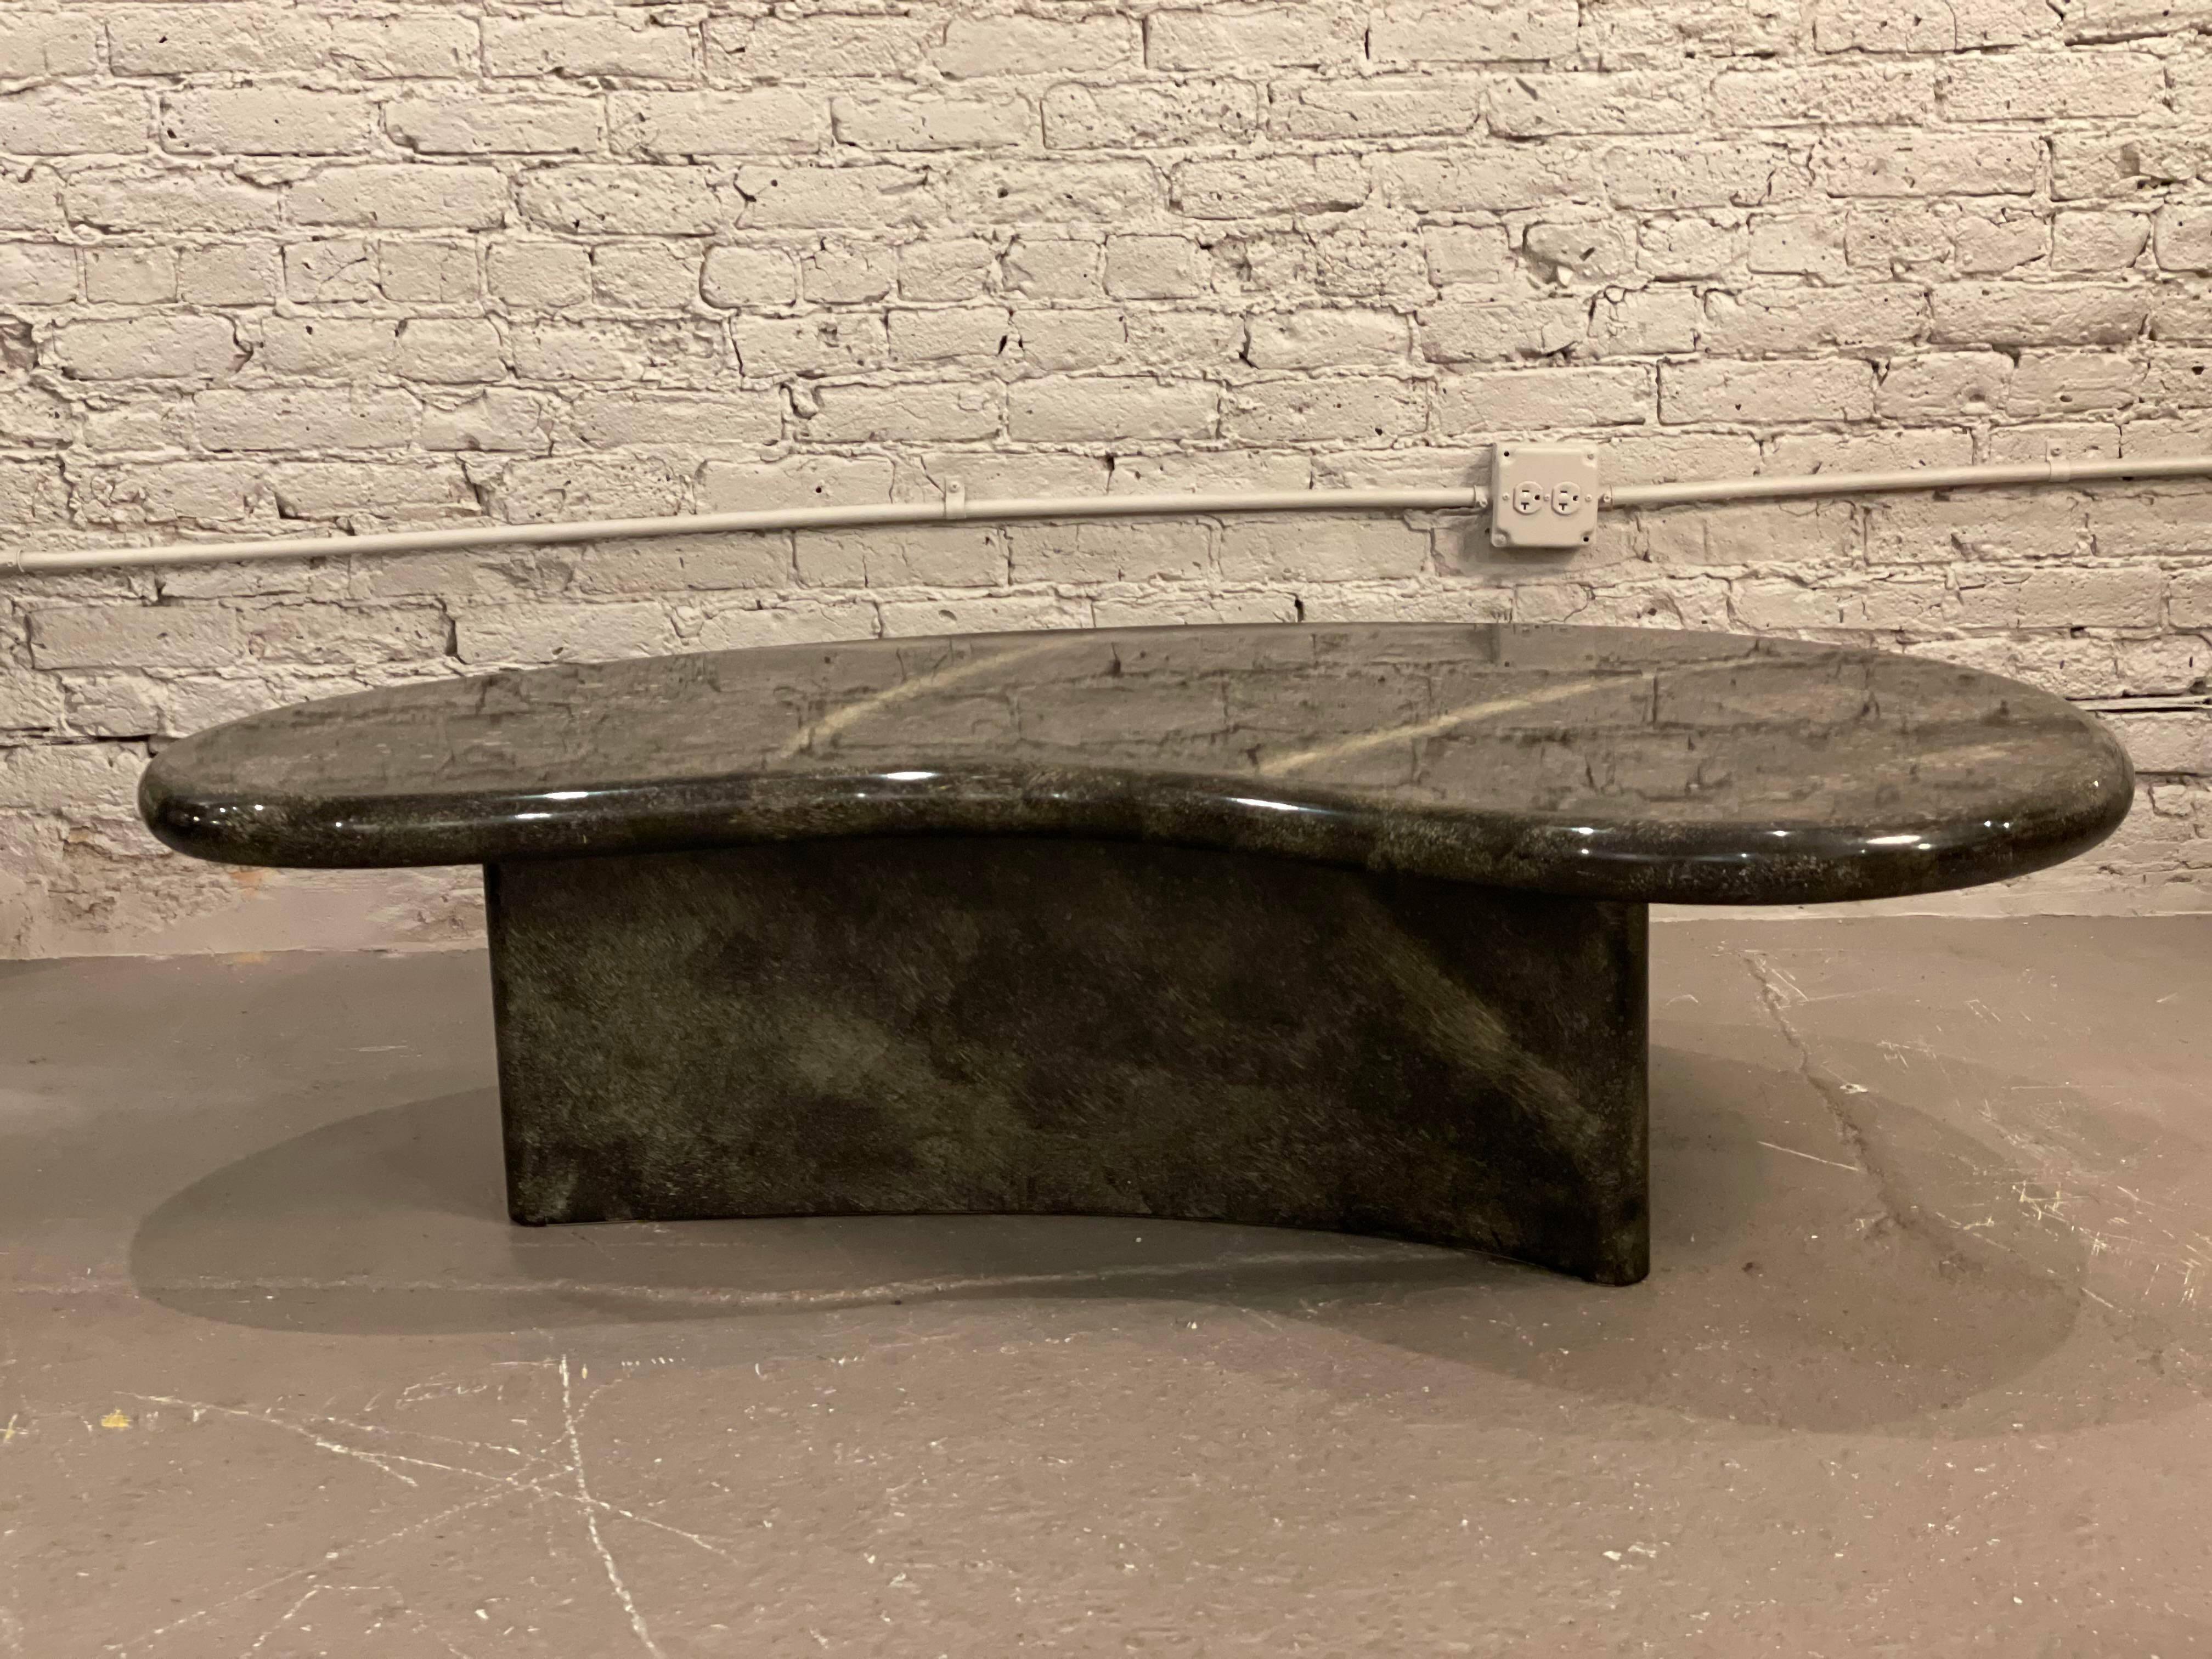 Super cool curved coffee table. The colors range from black, brown, to beige. The coating is lacquer and the pattern almost has an animal print or stone pattern. It’s very neutral with a lot of personality!

Dimensions: 60